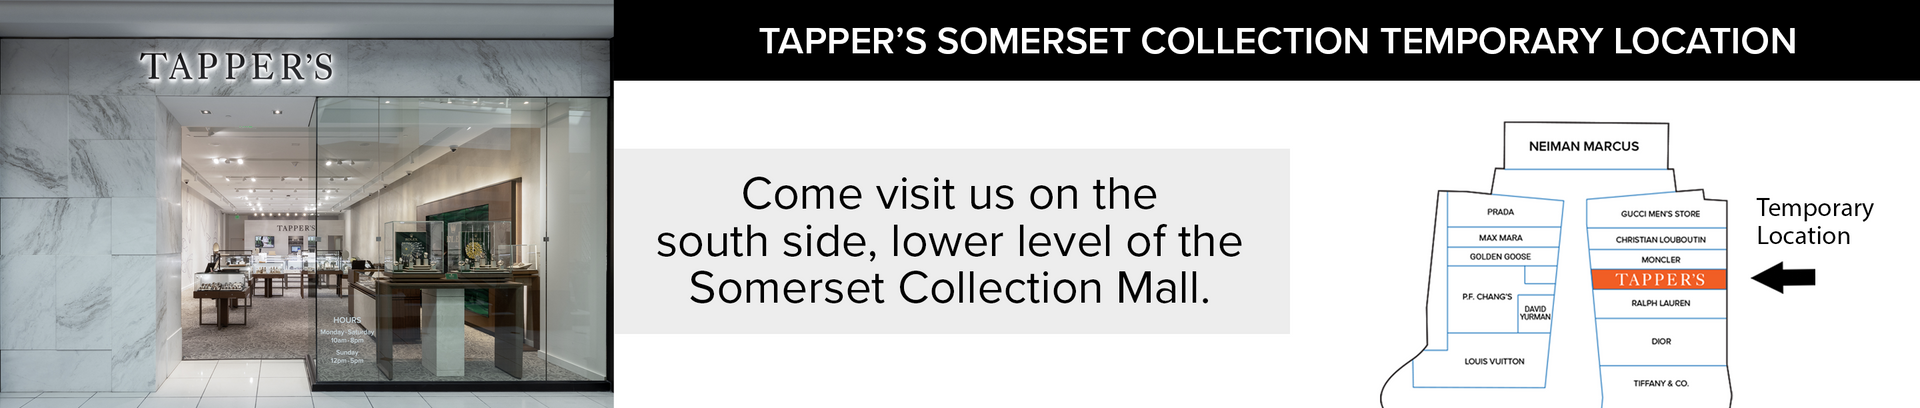 Tapper's Somerset Collection